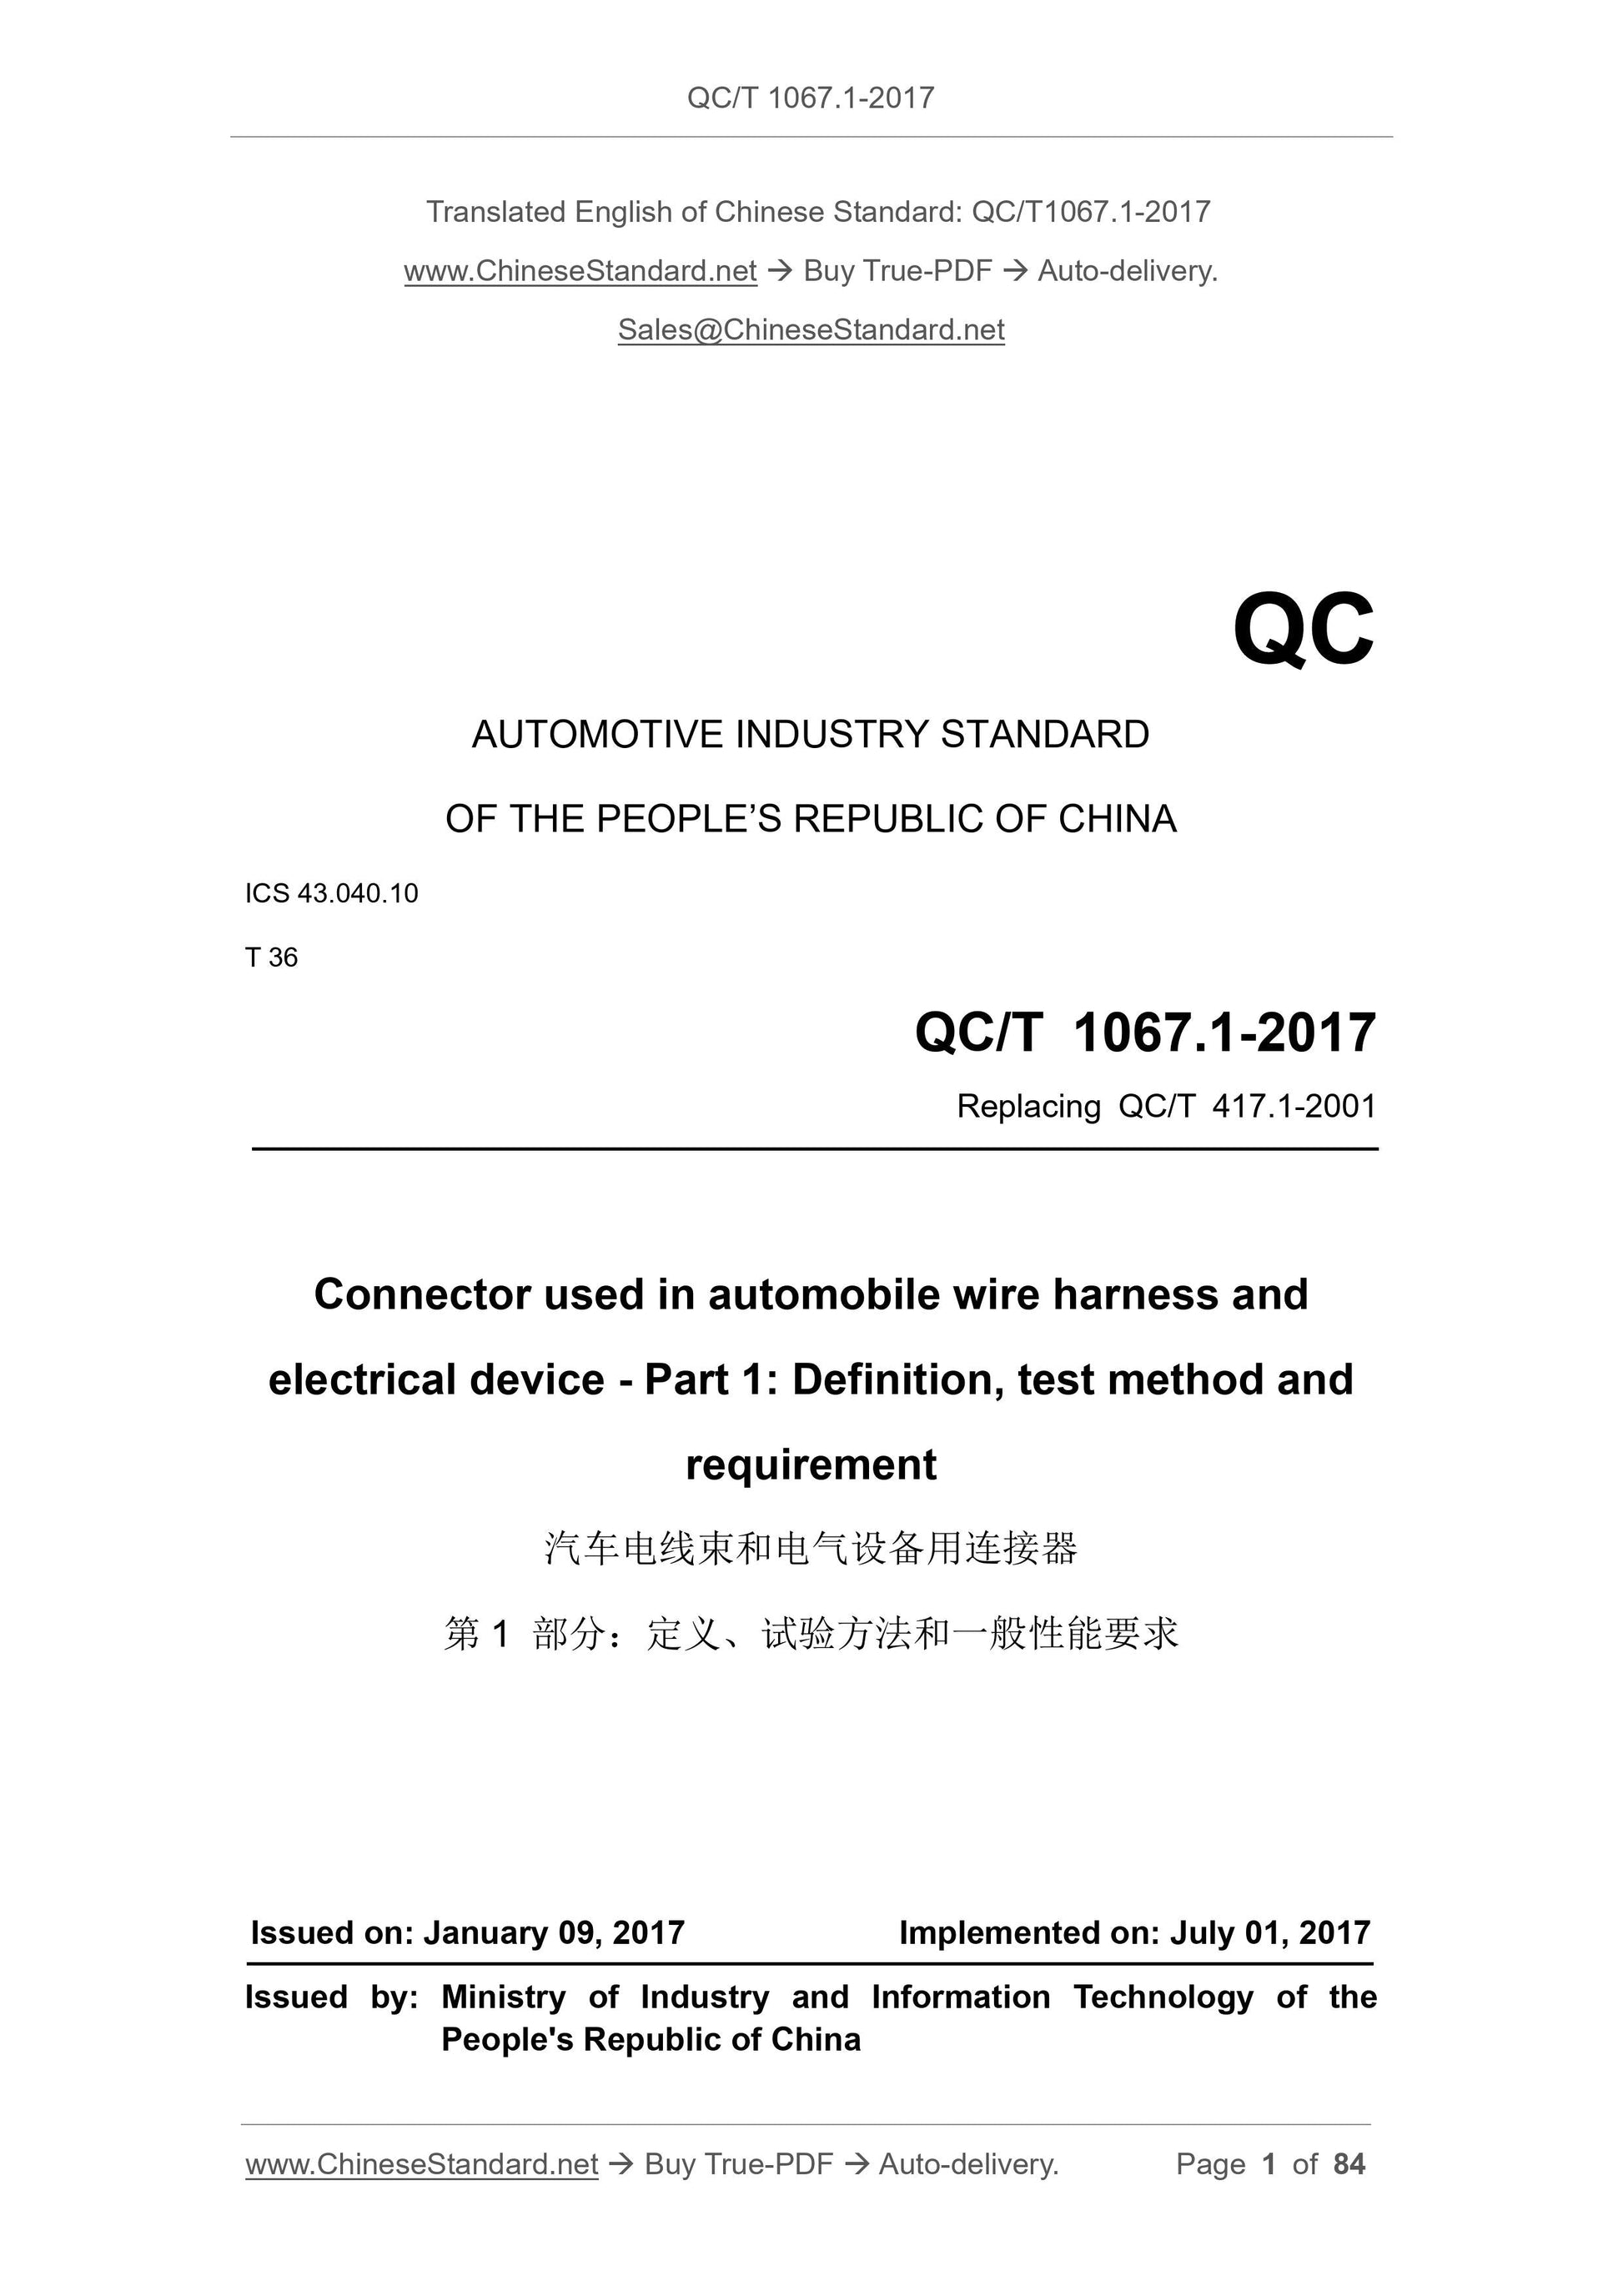 QC/T 1067.1-2017 Page 1